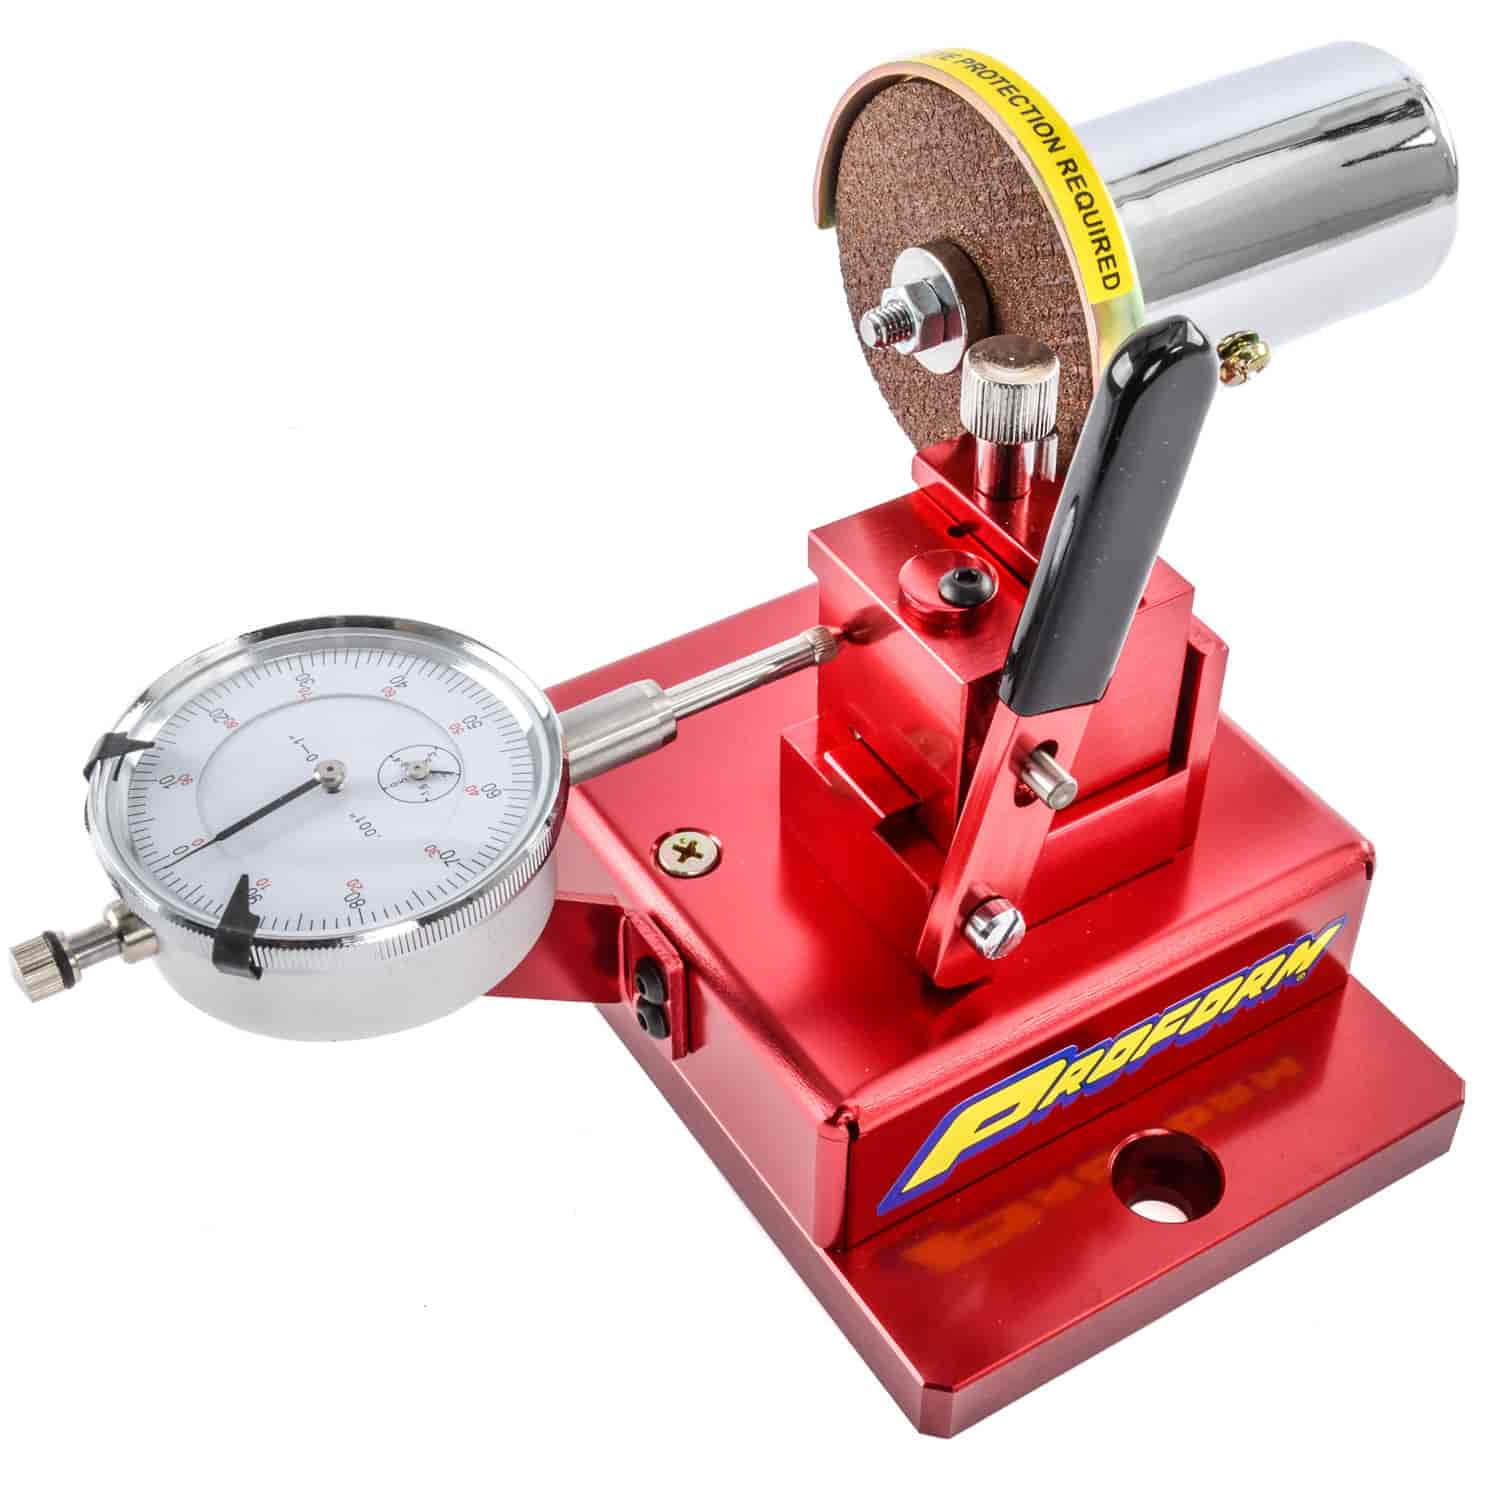 Electric Piston Ring Filer Includes: 12v Rechargeable Battery